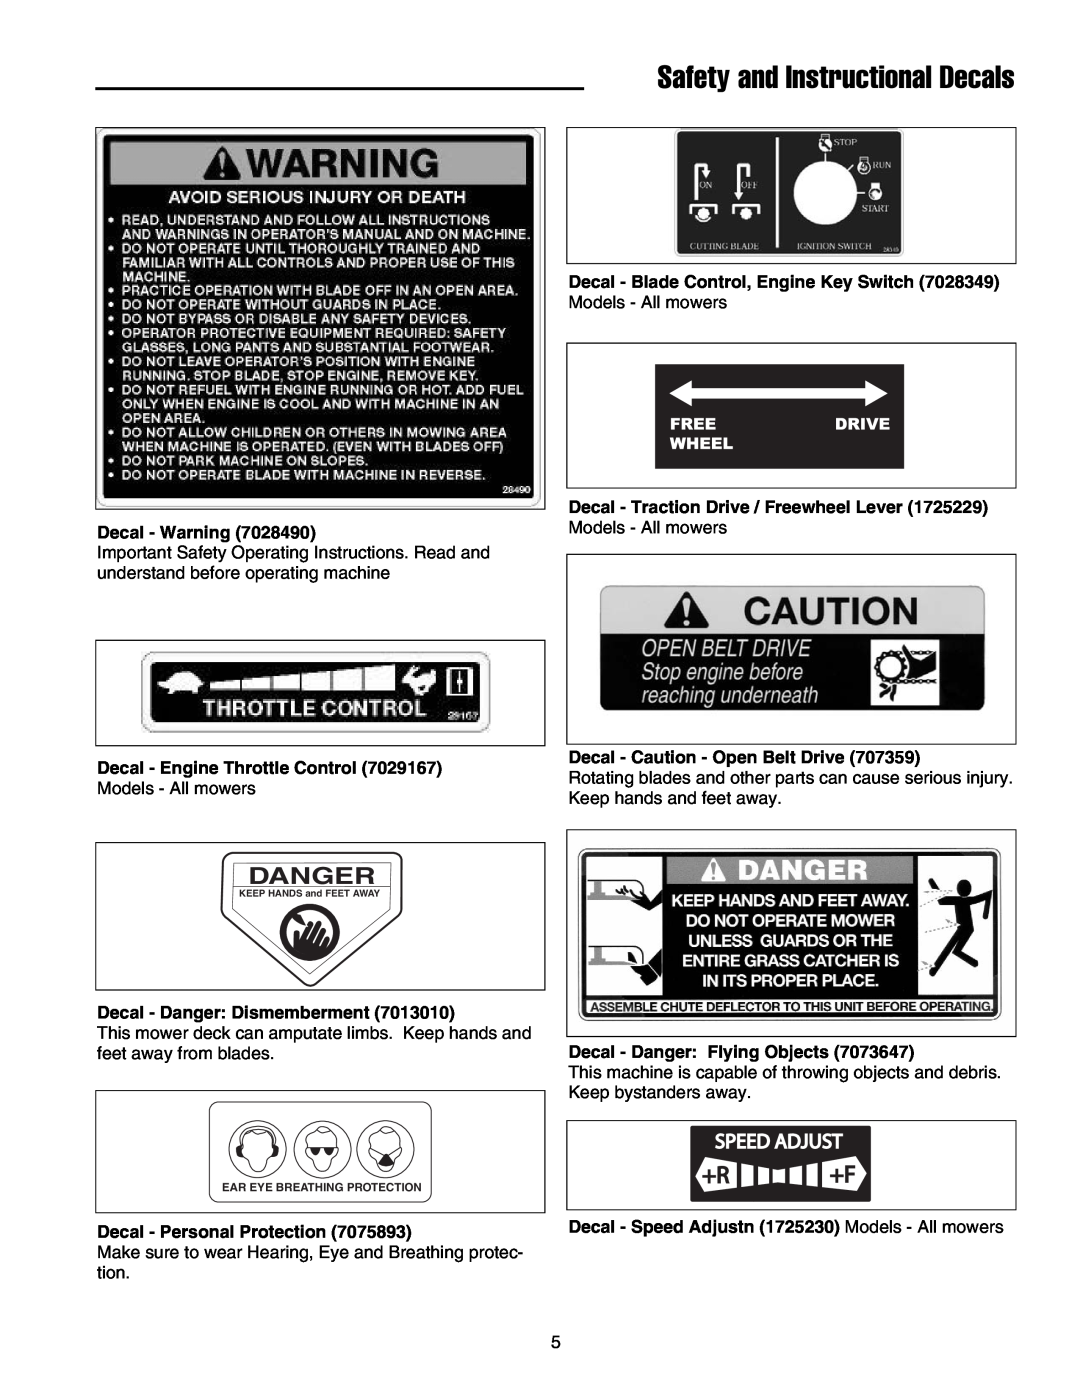 Briggs & Stratton FB13250BS manual Safety and Instructional Decals, Danger 